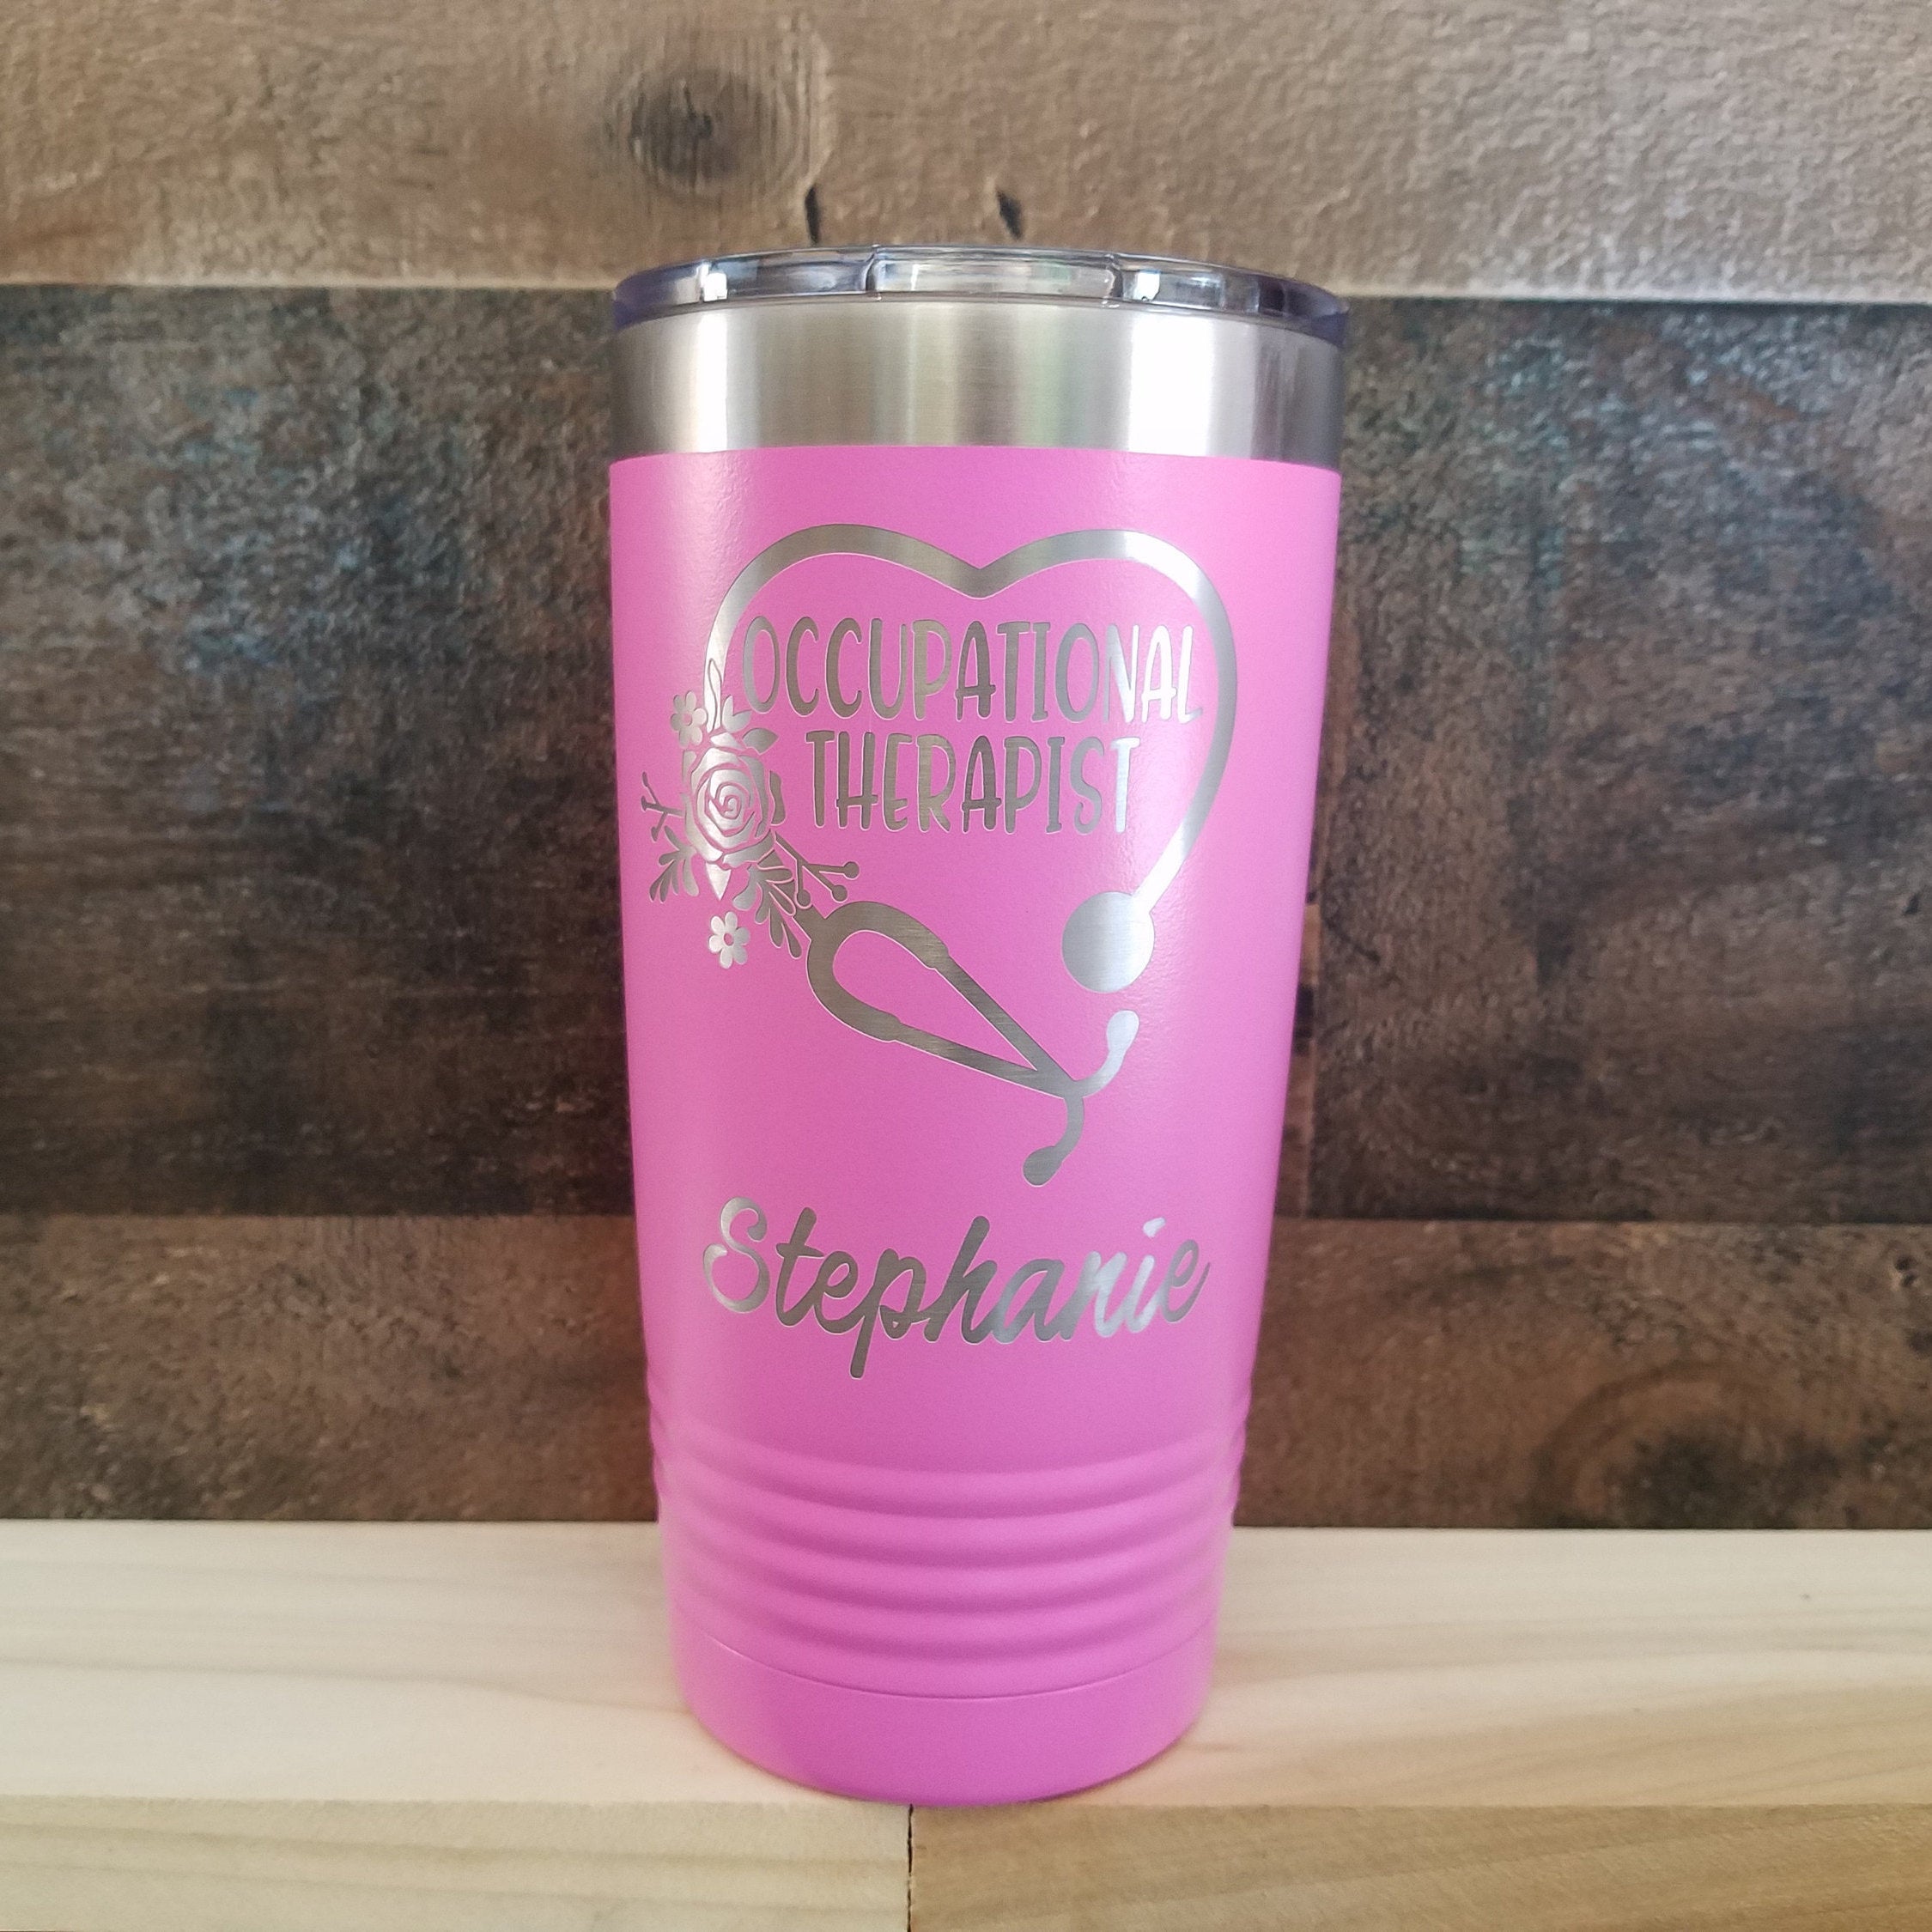 https://3cetching.com/wp-content/uploads/2020/09/occupational-therapist-engraved-personalized-ot-tumbler-yeti-style-cup-occupational-therapy-gift-5f5fb5dc.jpg